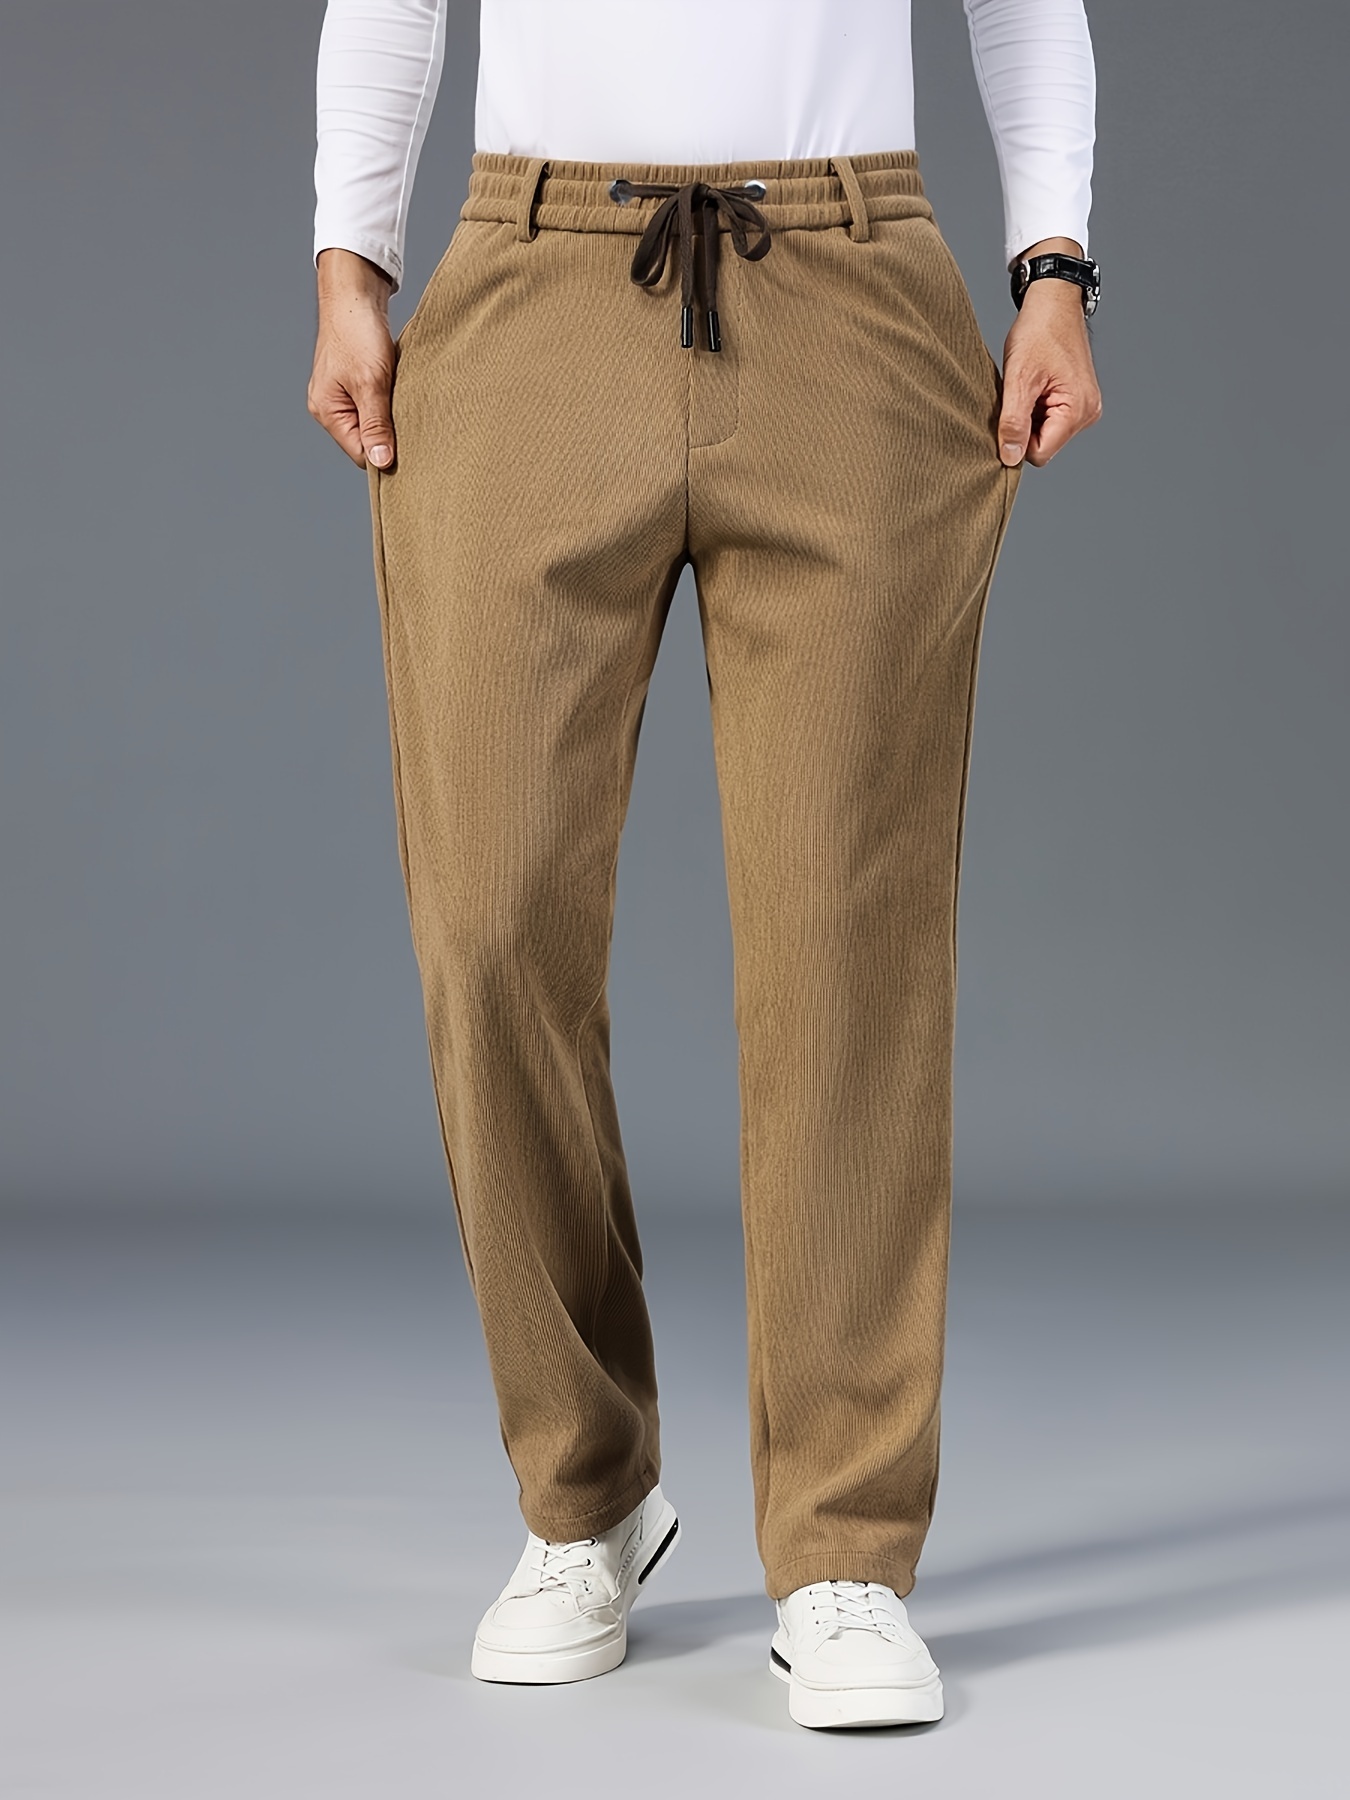 Men's Trousers for Fall/Winter New Style Cotton Casual Pants Men's